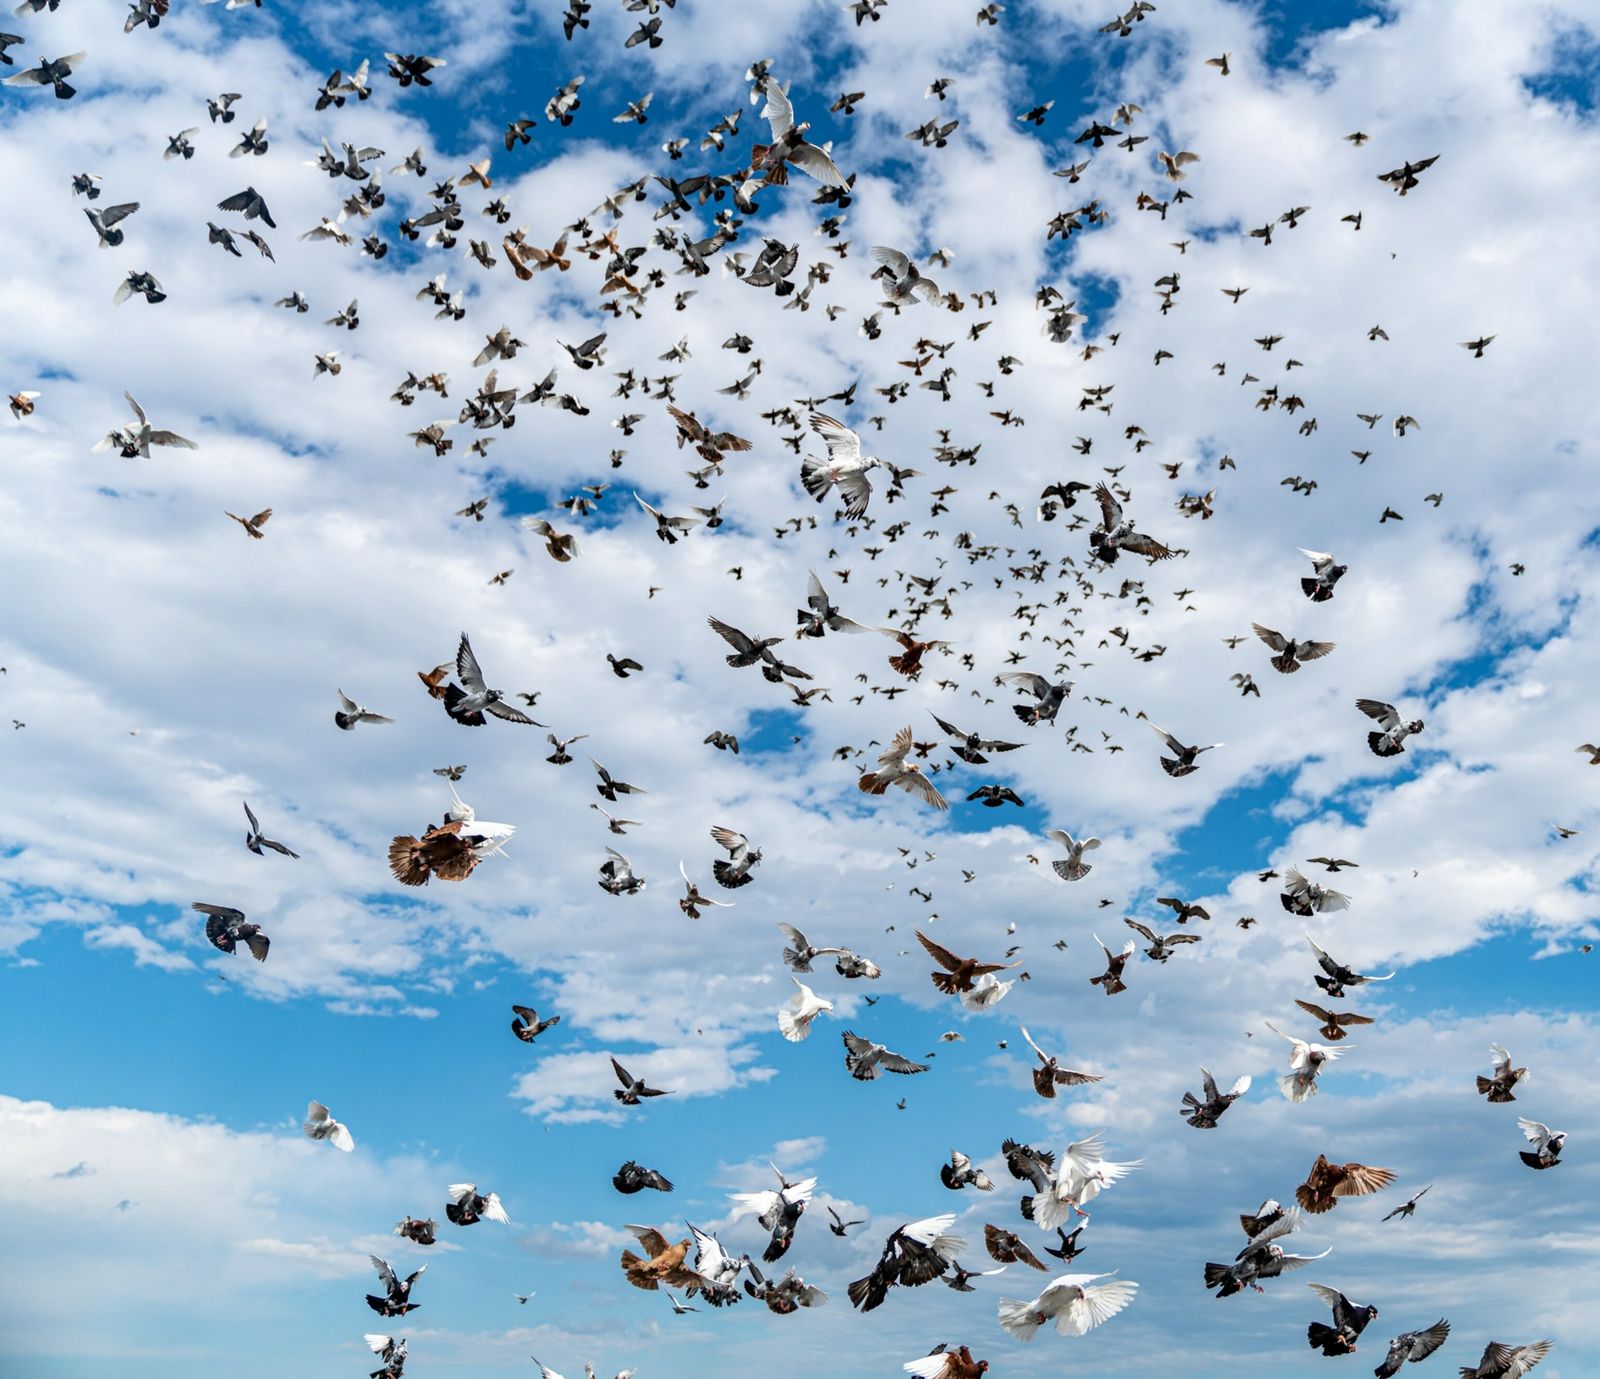 How many birds fly on the ground?